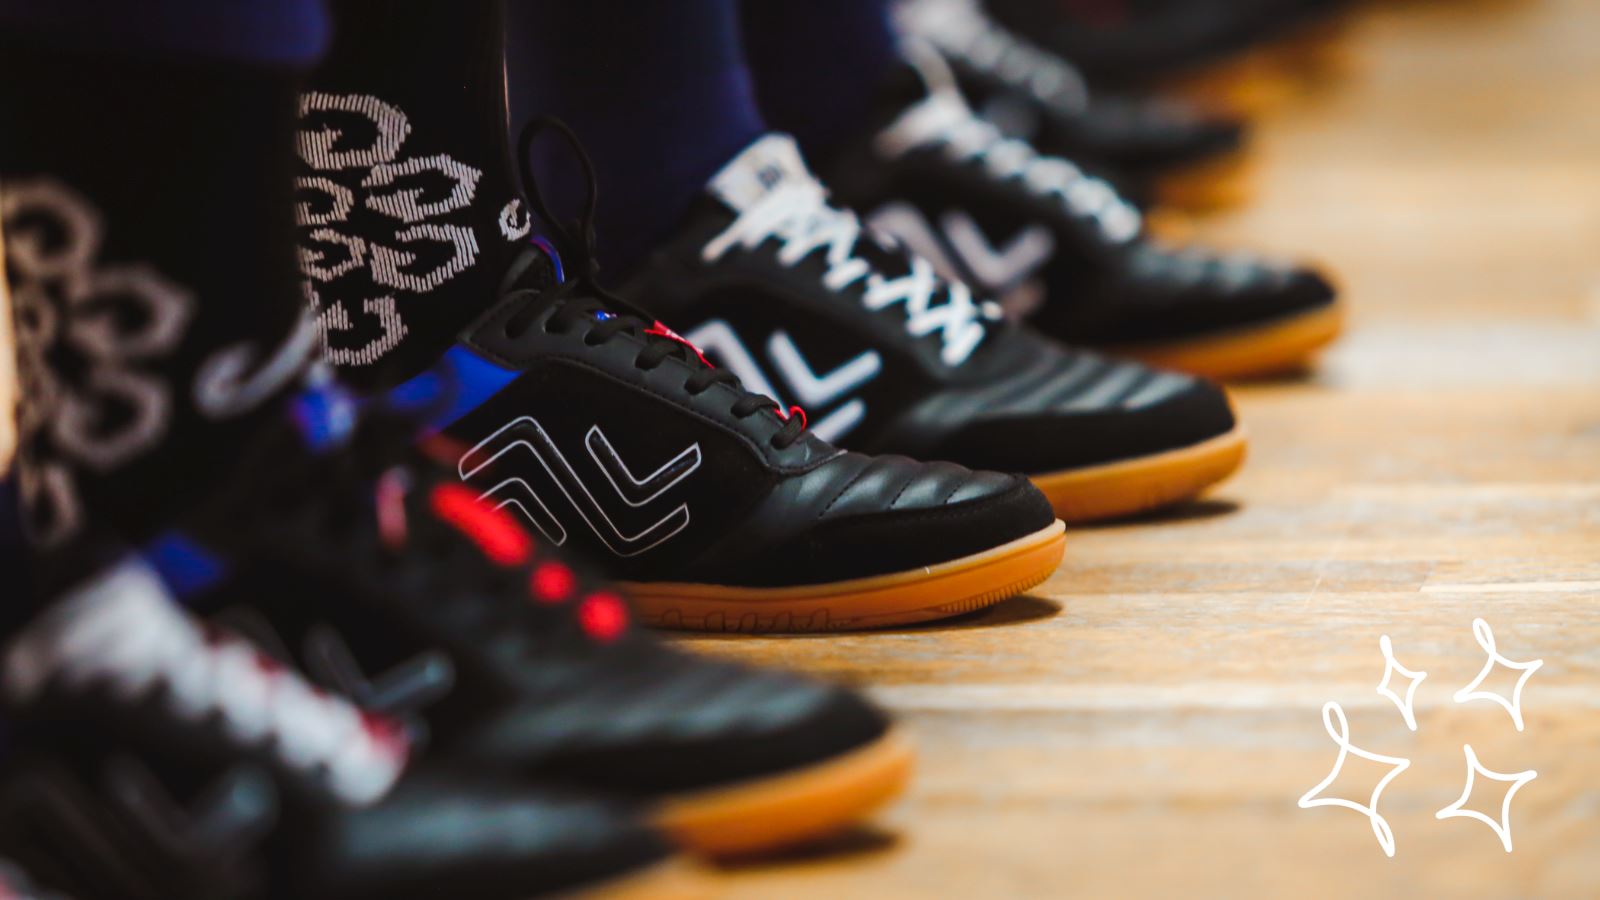 Close up of black IDA Spirit indoor women's soccer shoes in a line on a futsal court.